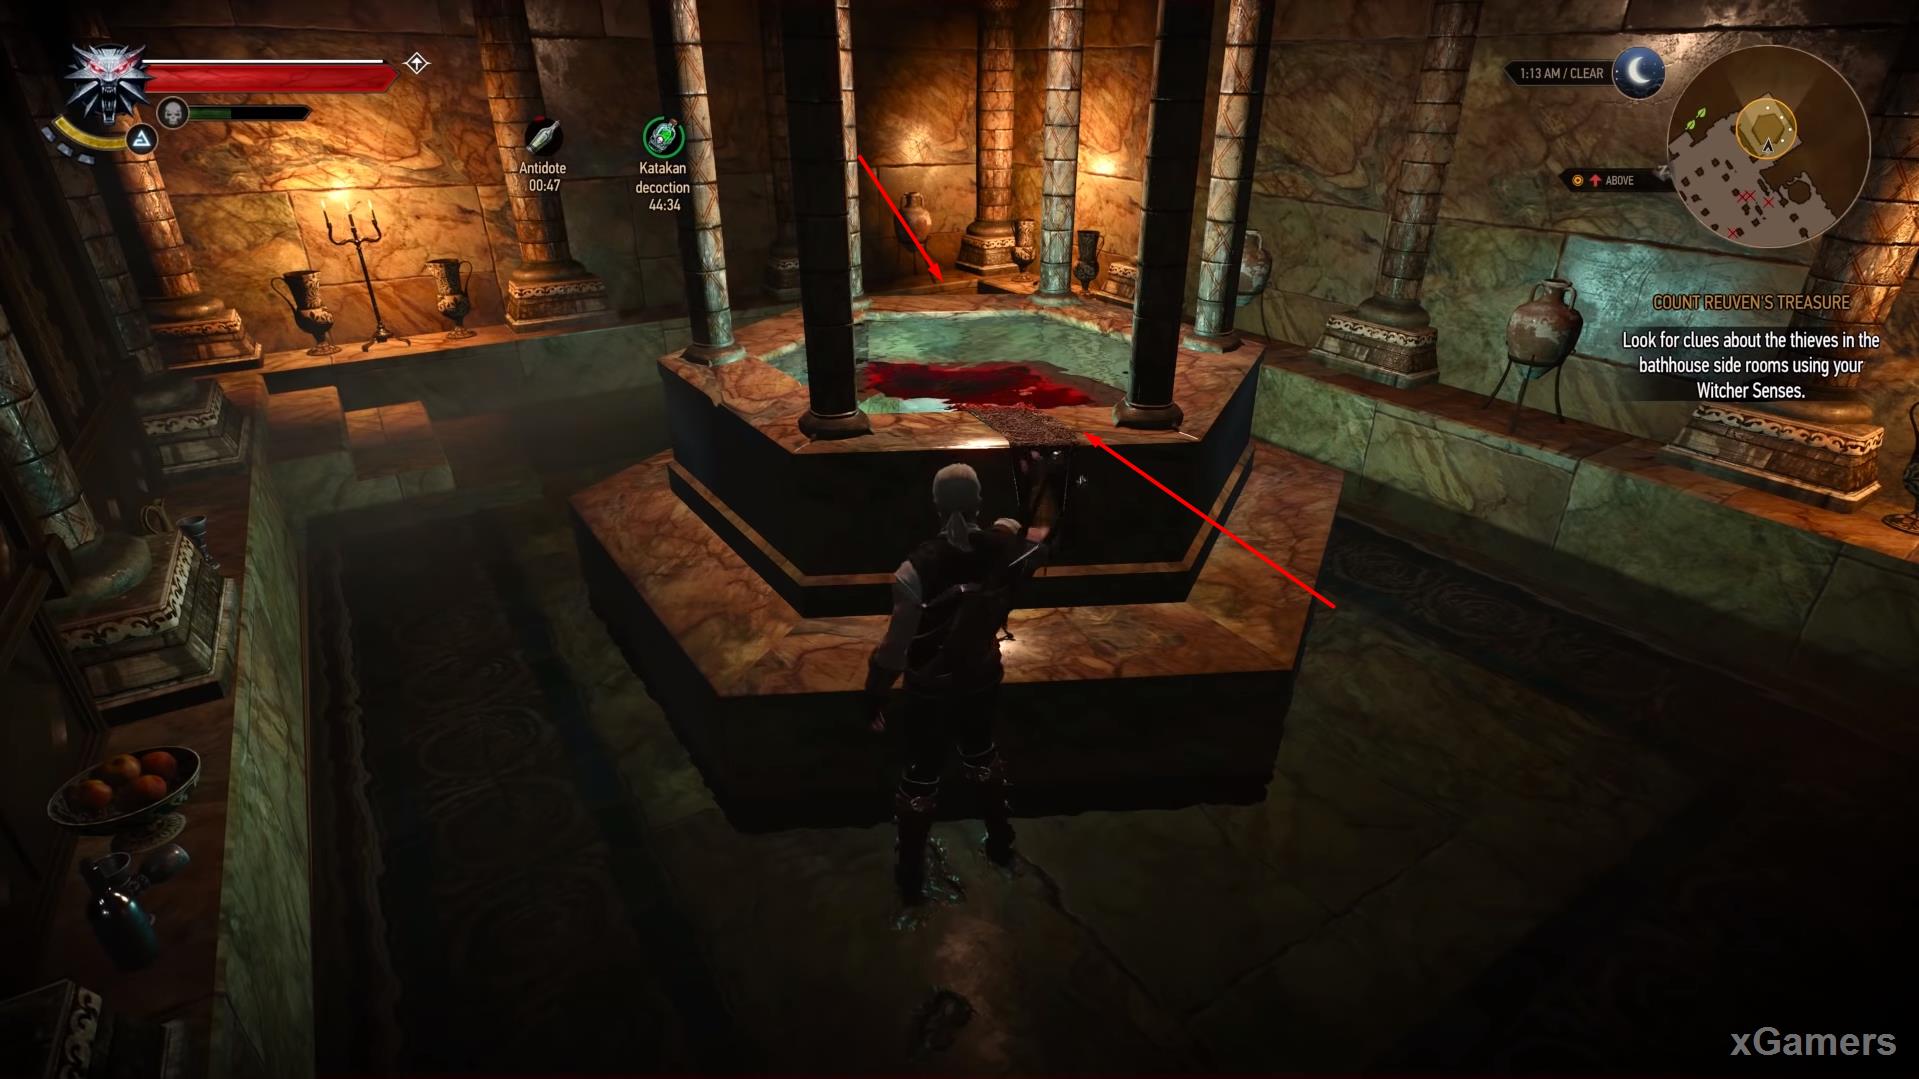 Geralt find oil traces in one of the pools, and going around the pool 